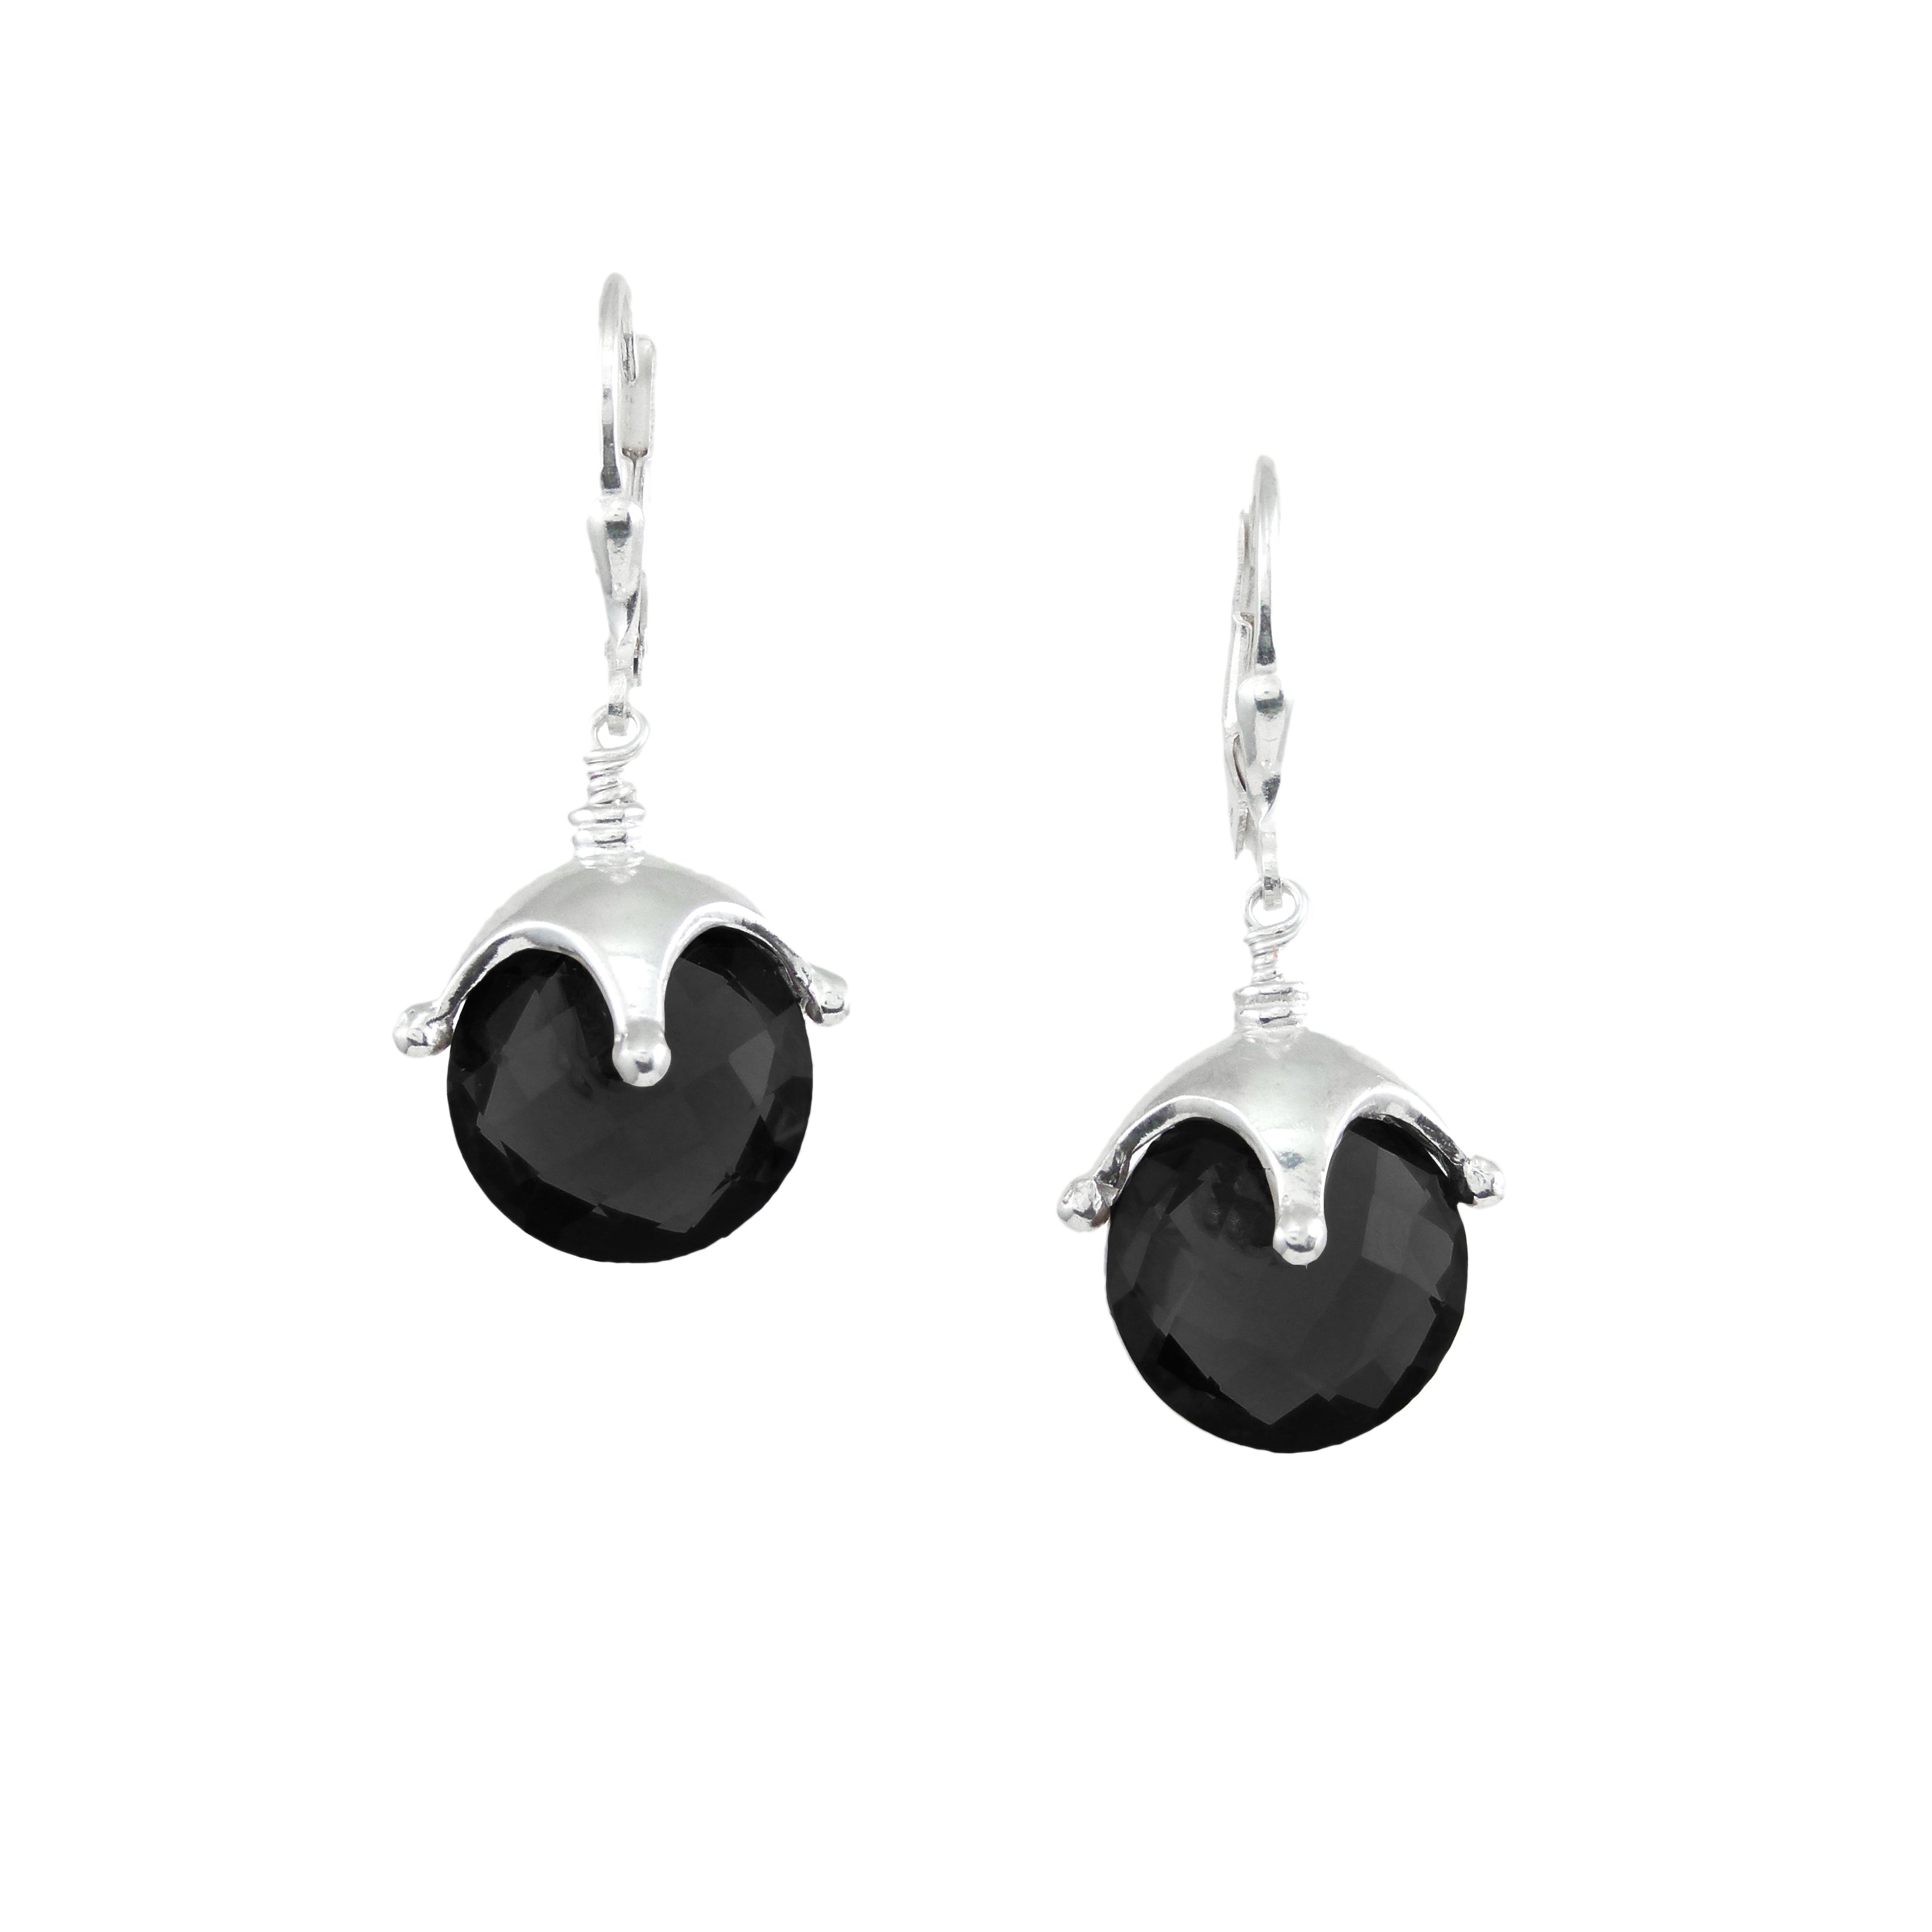 Jester Cap Earring - Silver, Black Onyx - Q Evon Fine Jewelry Collections